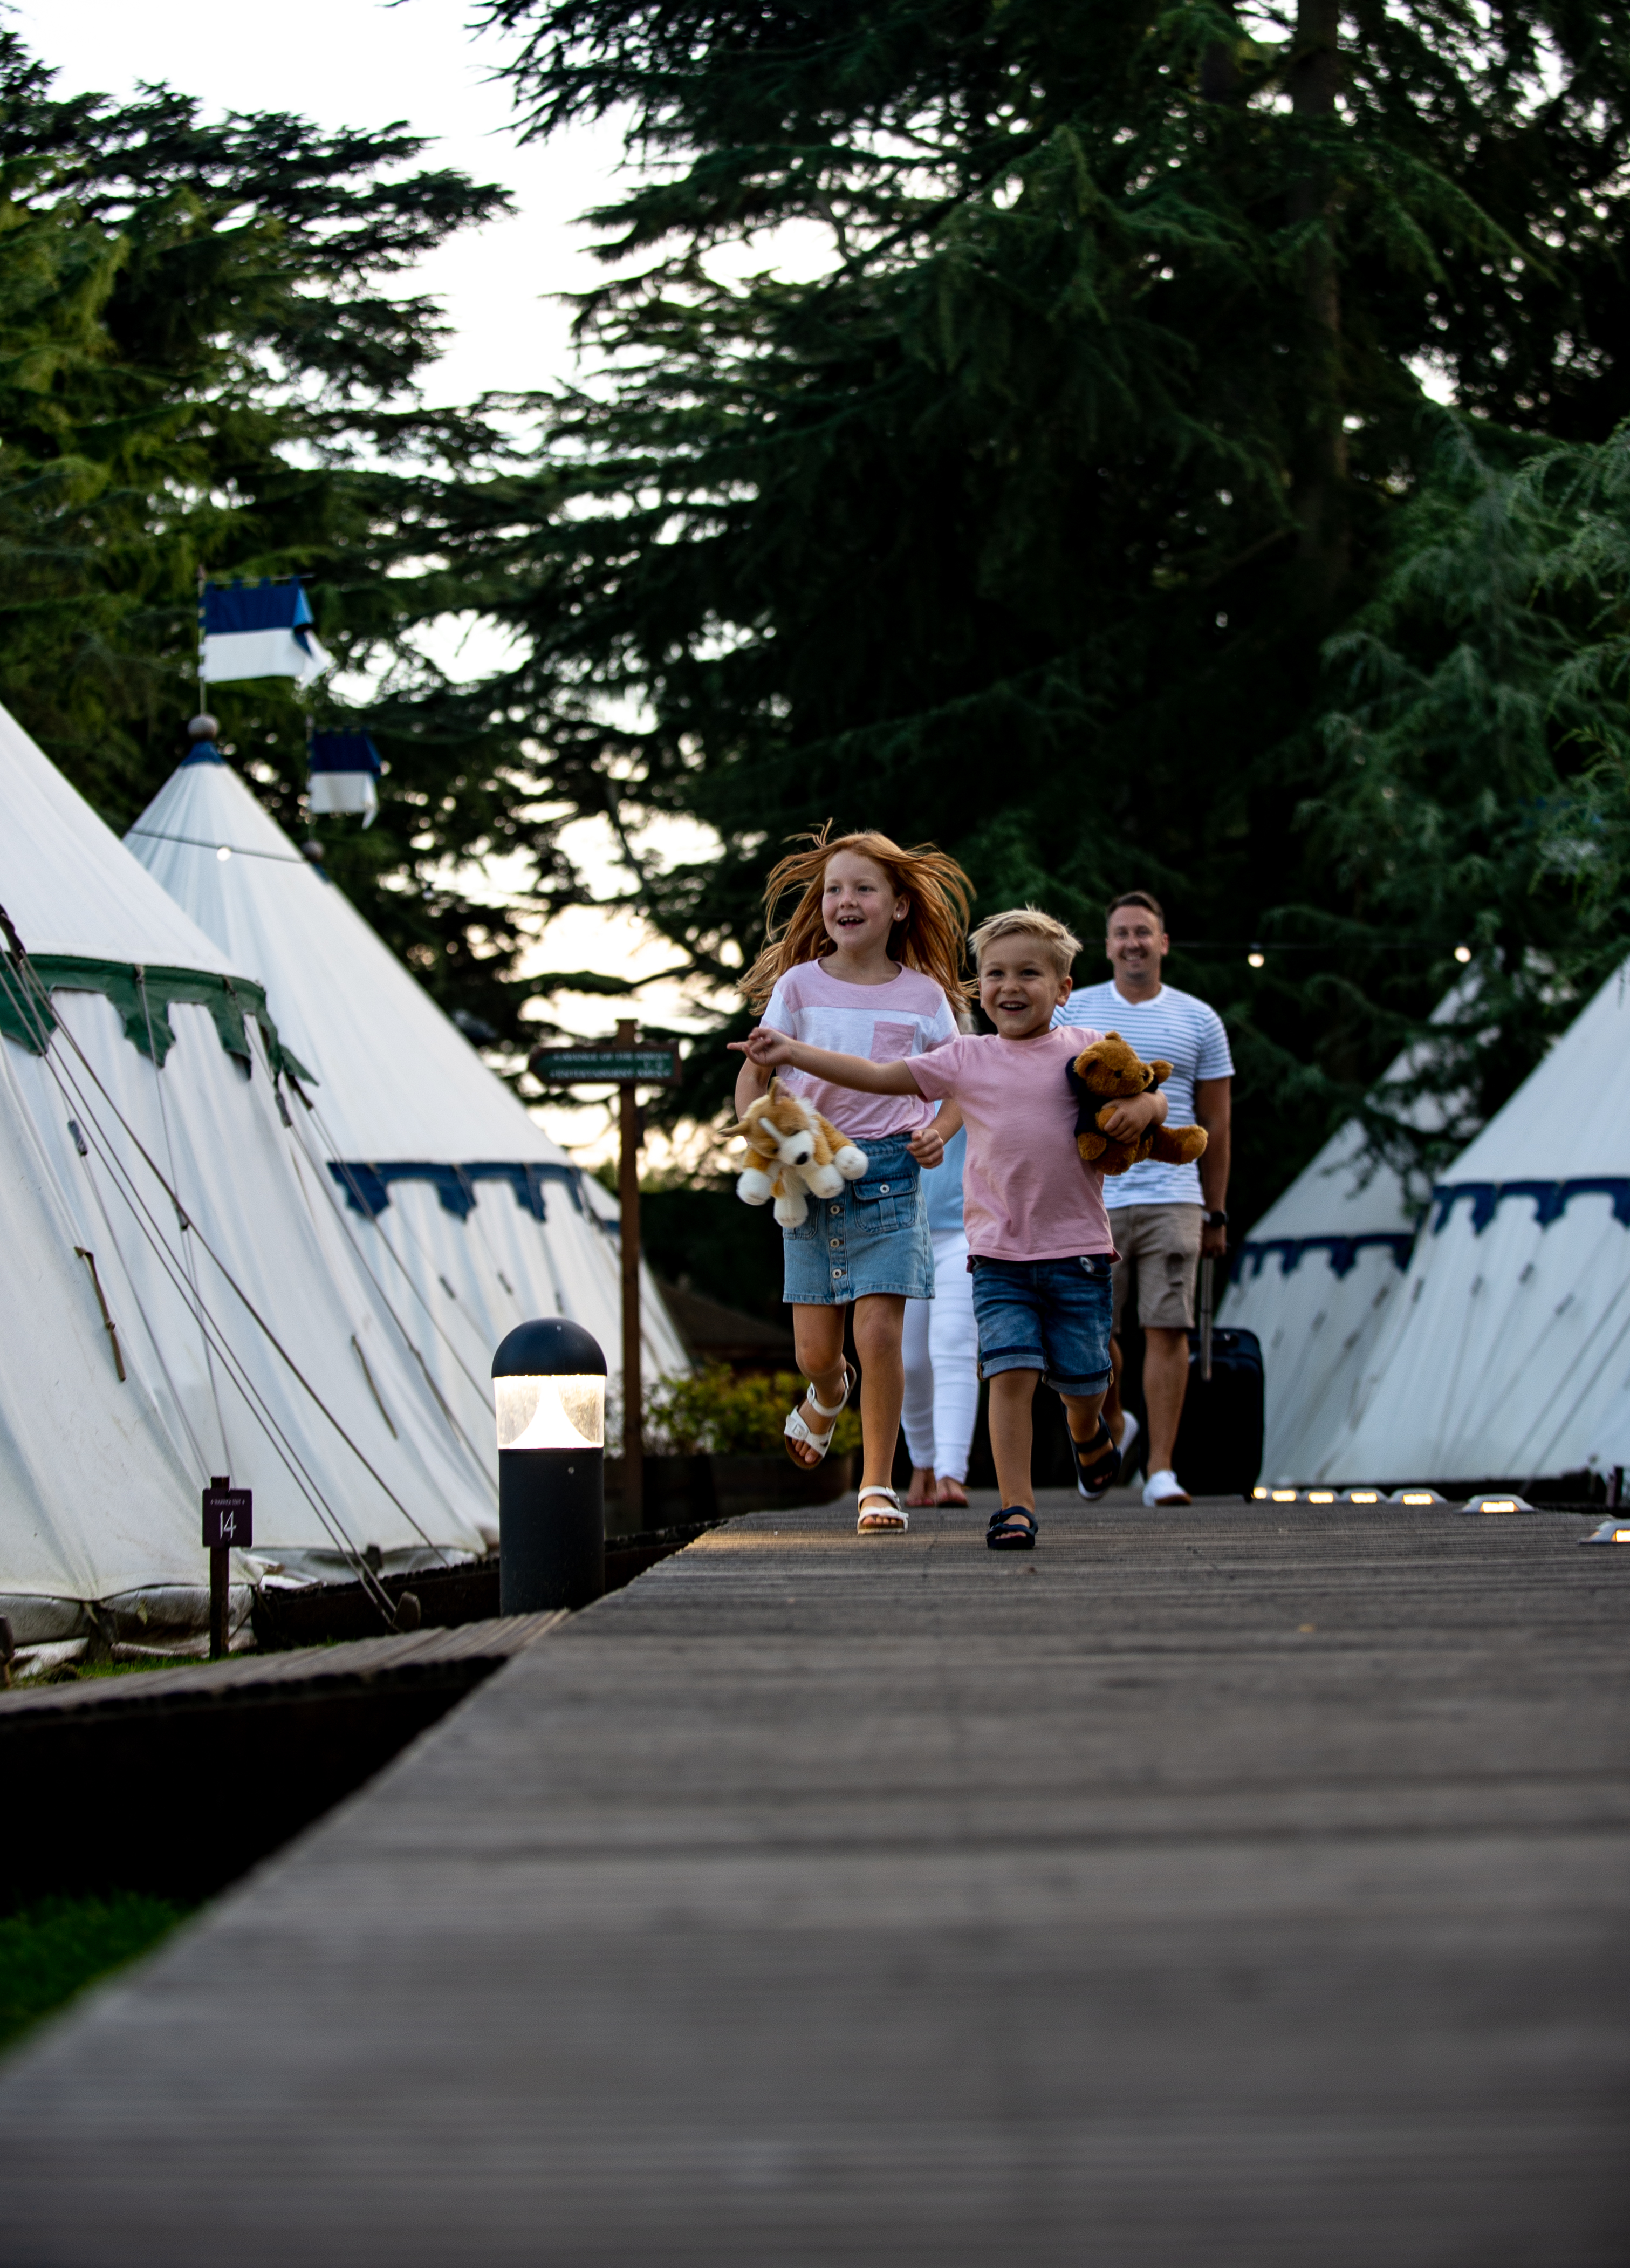 Excited children glamping